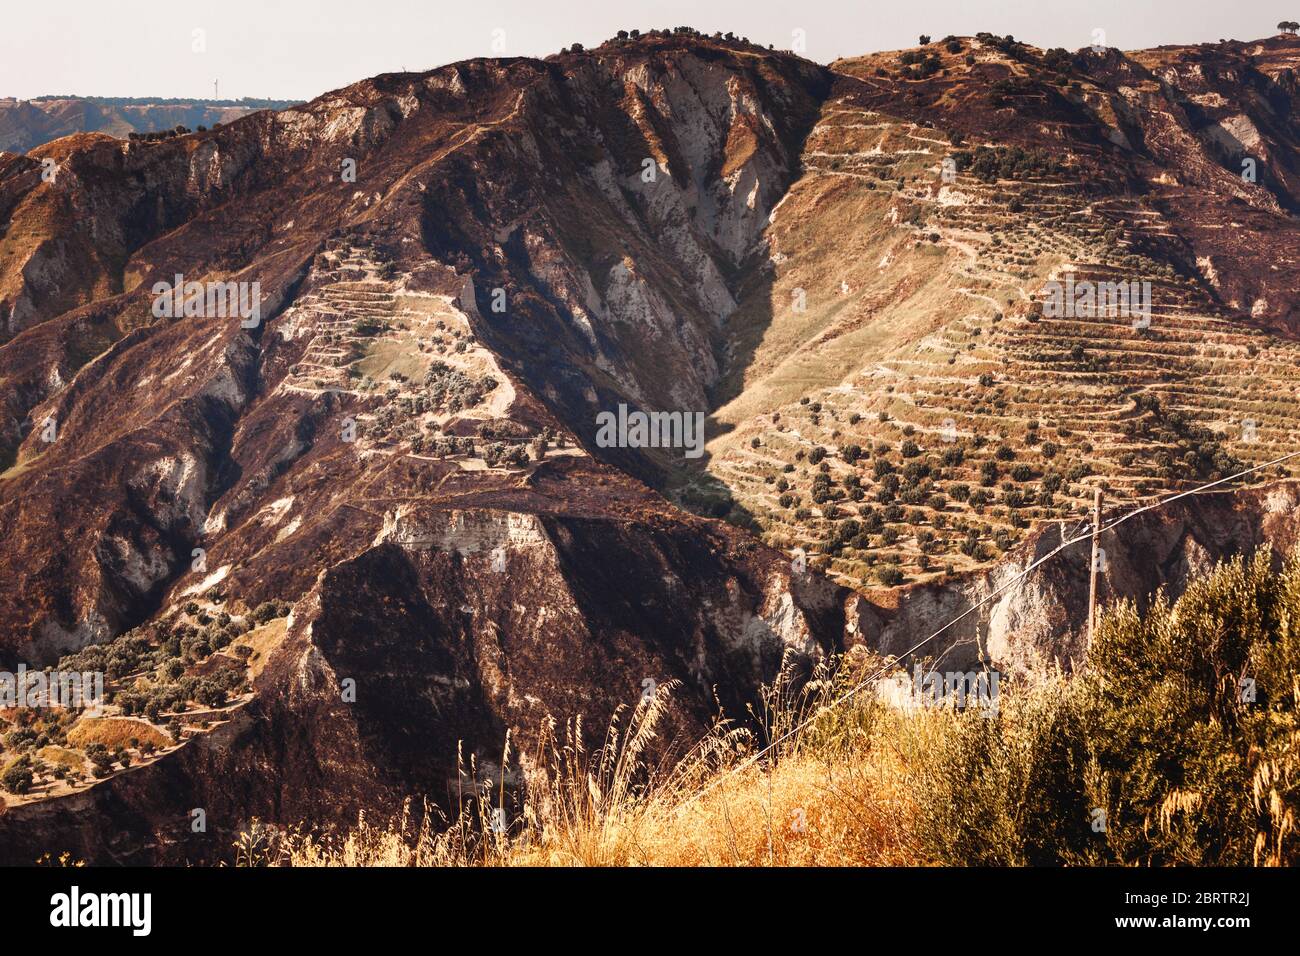 View on scorched hills with olive gardens near Reggio Calabria Stock Photo